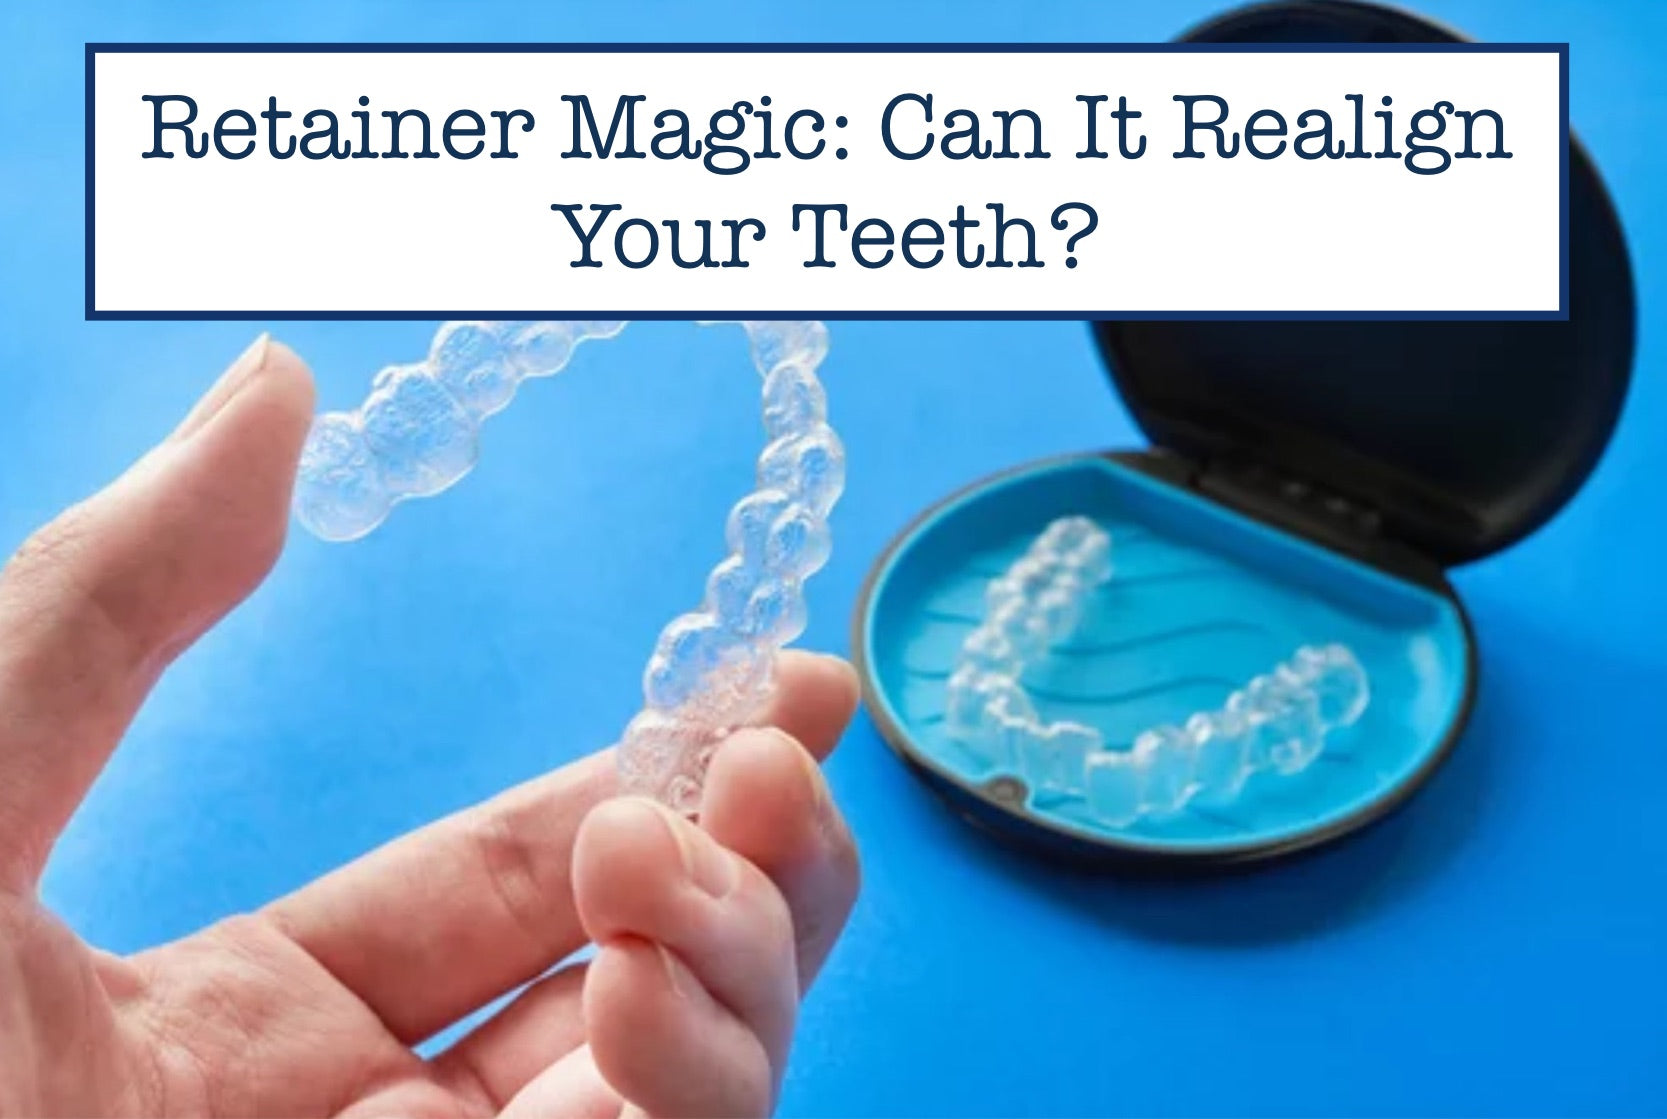 Retainer Magic: Can It Realign Your Teeth?